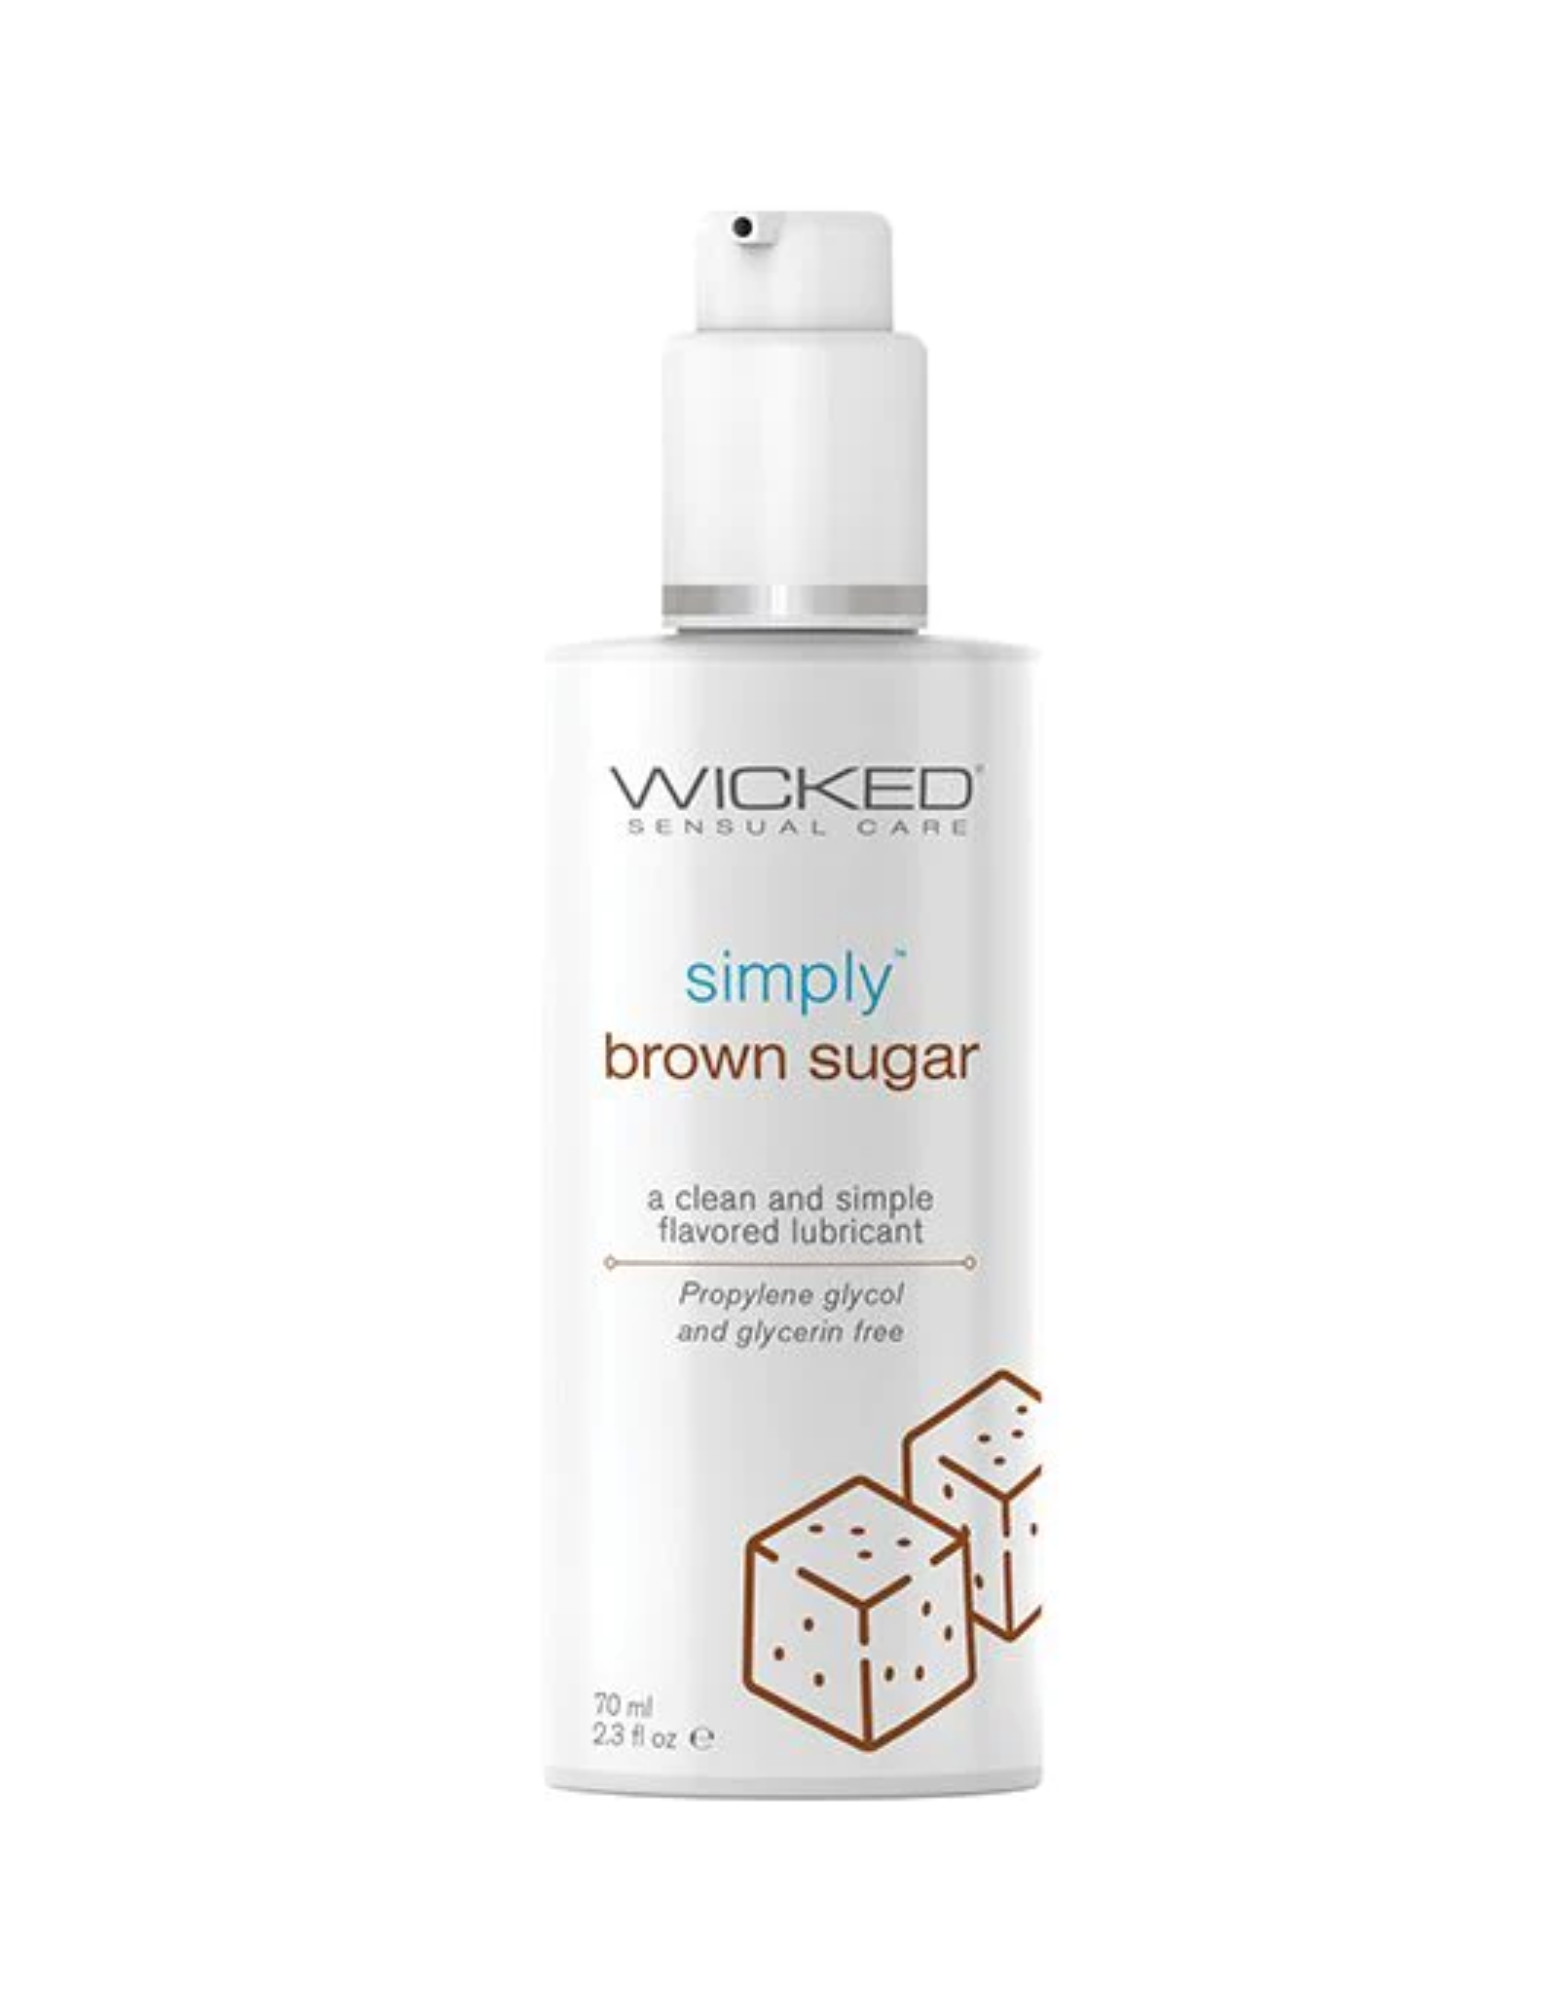 Photo of the bottle of Simply Water Based Flavored Lubricant from Wicked Sensual Care (2.3oz) Brown Sugar.